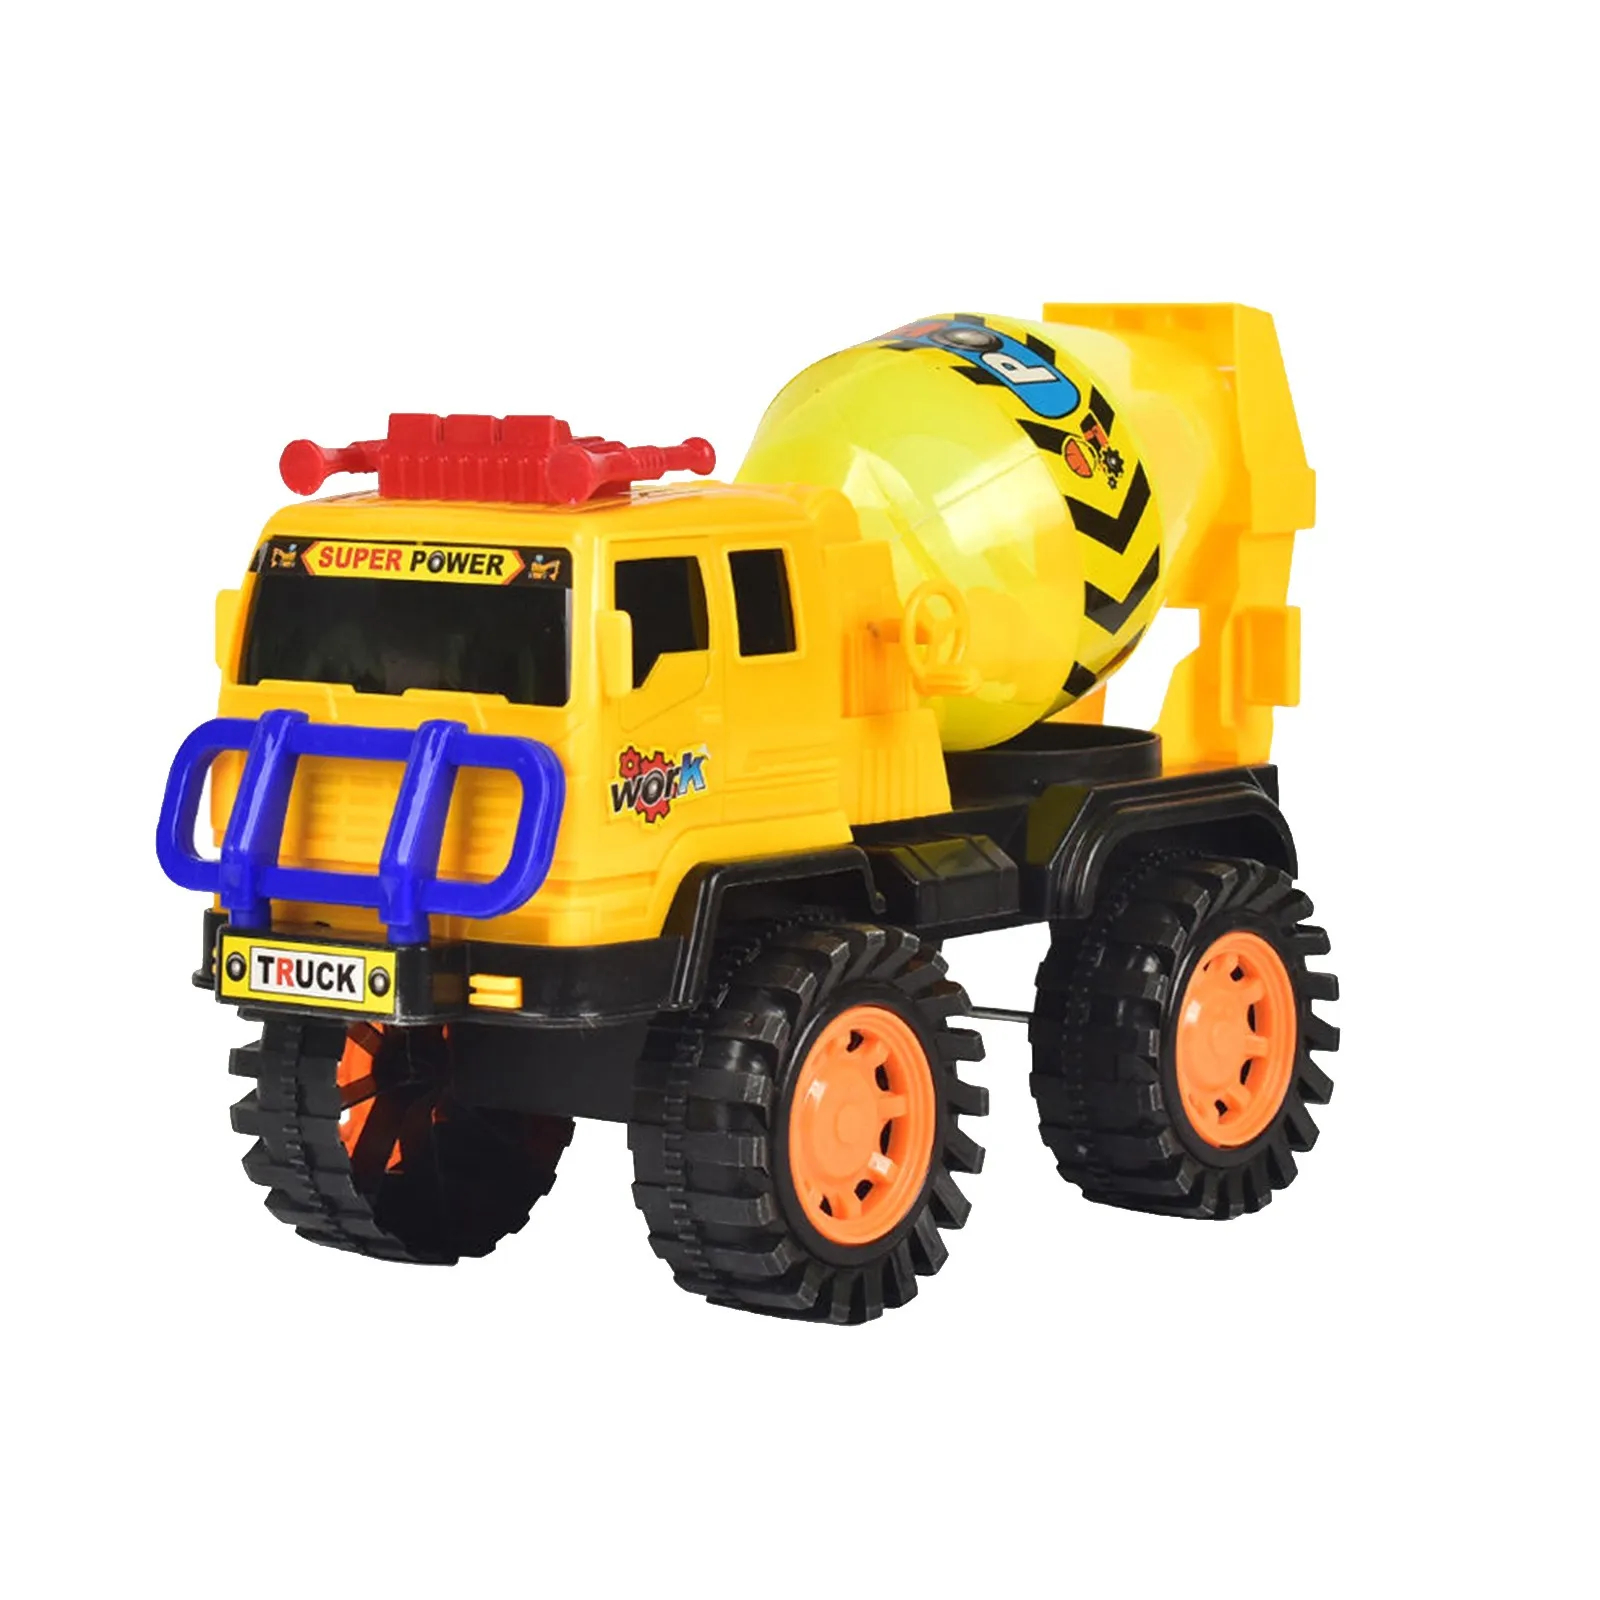 Beach Sand Toys,Childrens Inertial Engineering Vehicle Toy Car Model Boy Mini Excavator,Sand Toys for Toddlers Kids Outdoor Play,Water & Sand Vehicles Beach Playset for Kids 10 Months+ 